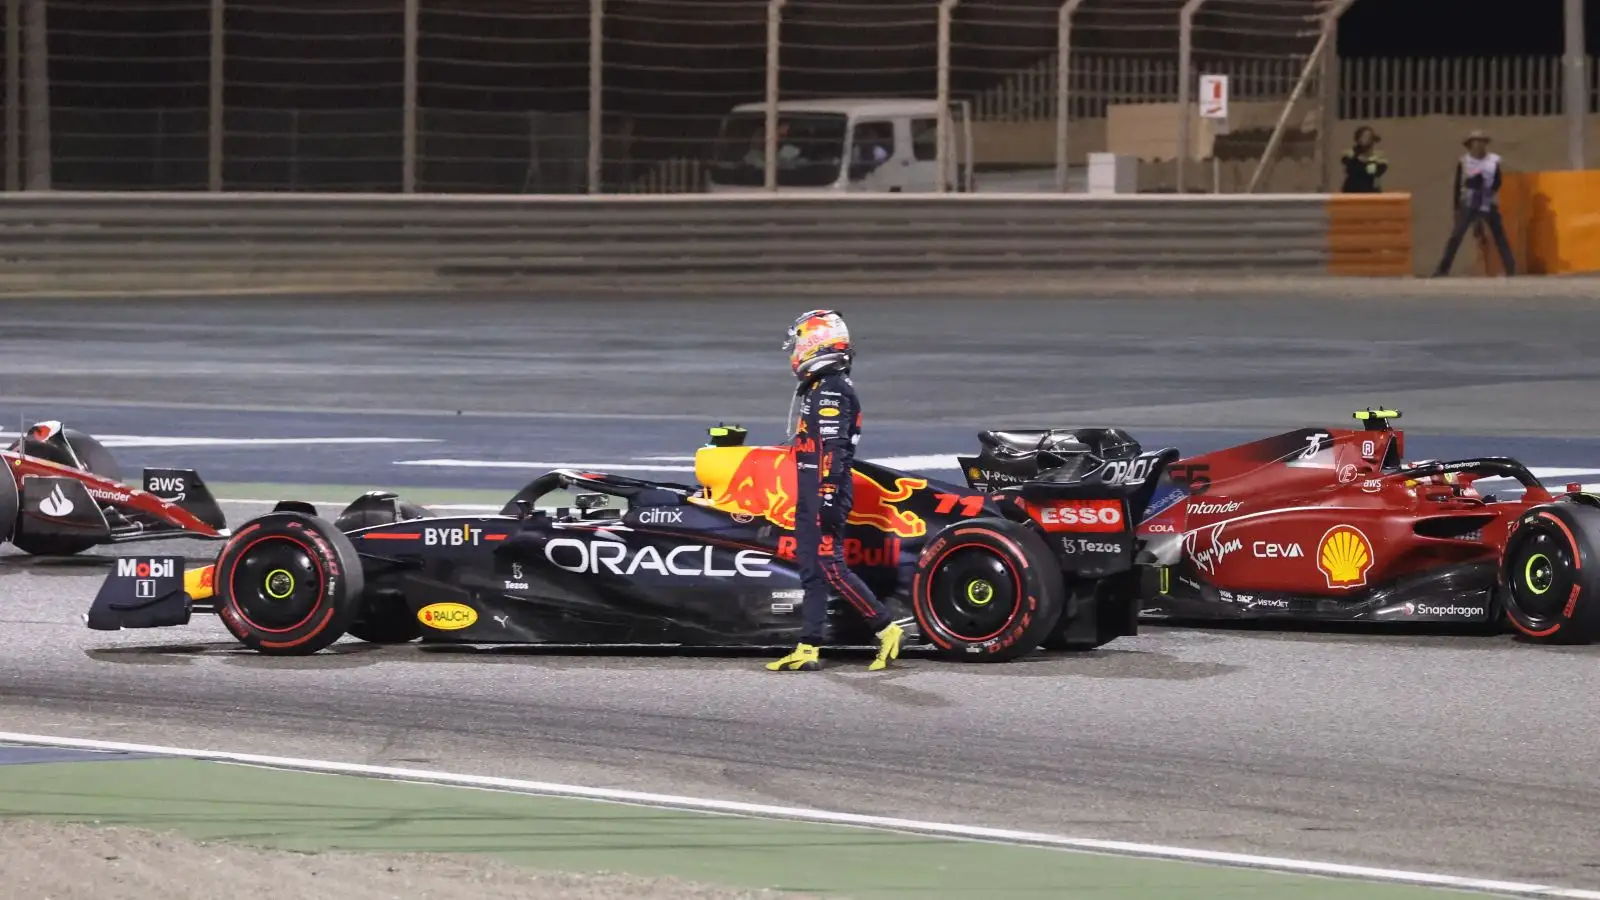 Sergio Perez walks away from his powerless Red Bull car. Bahrain, March 2022.